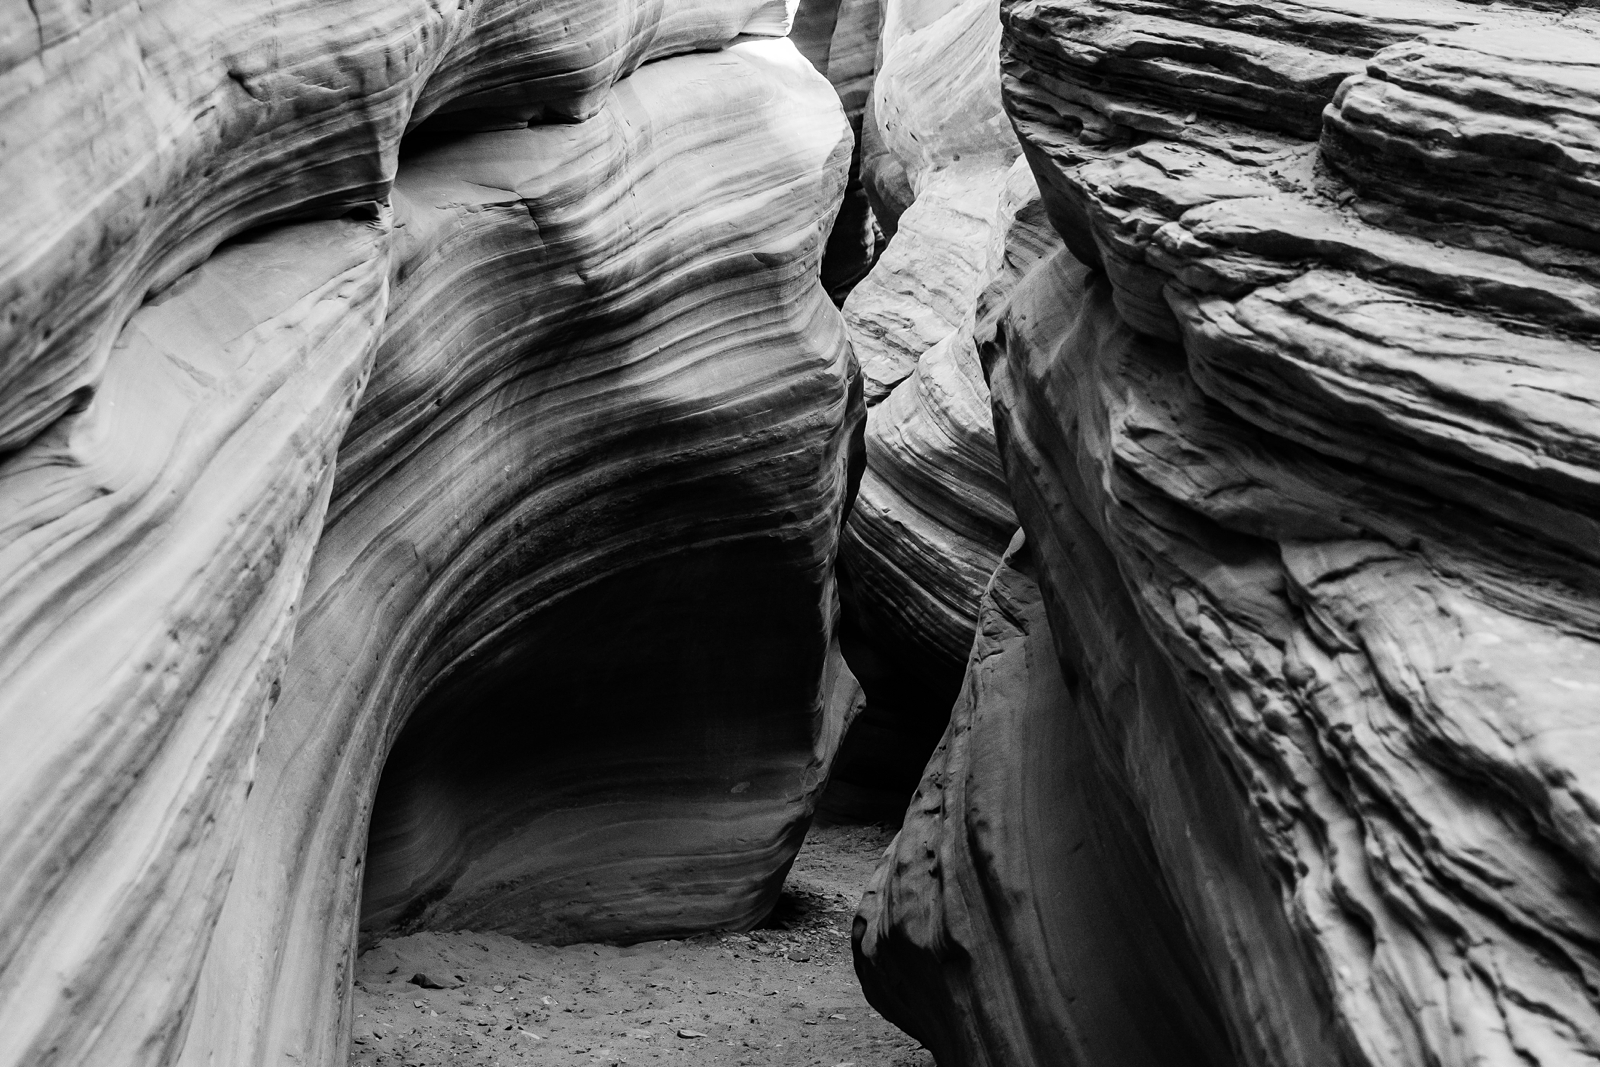 Slot canyons are epic places to elope.